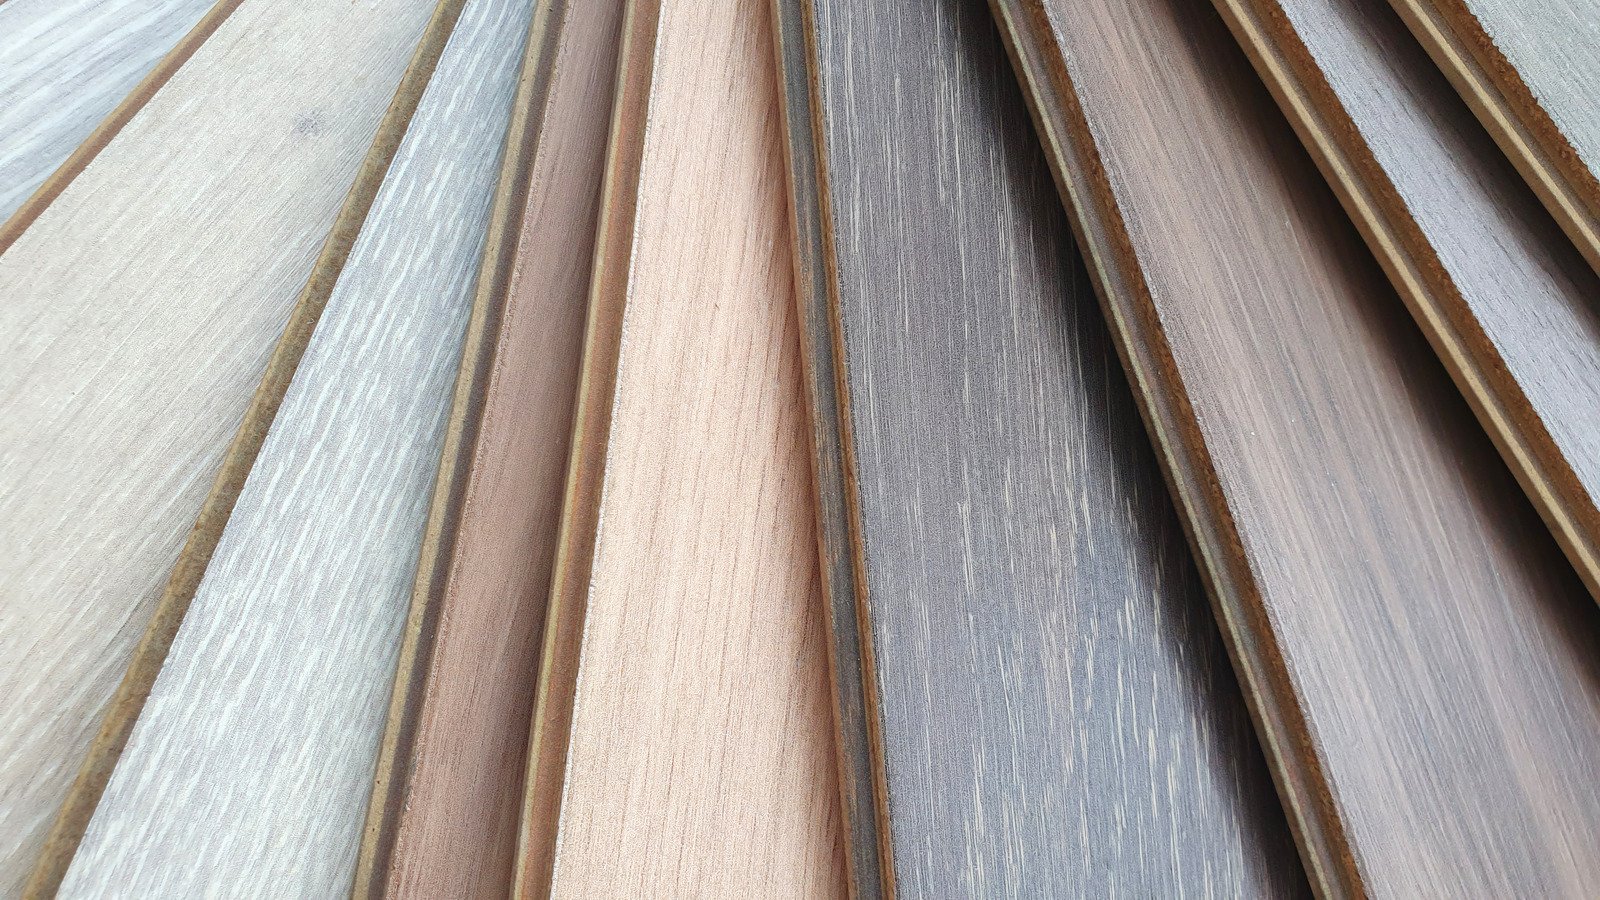 Vinyl Vs. Laminate Flooring: What's The Difference?